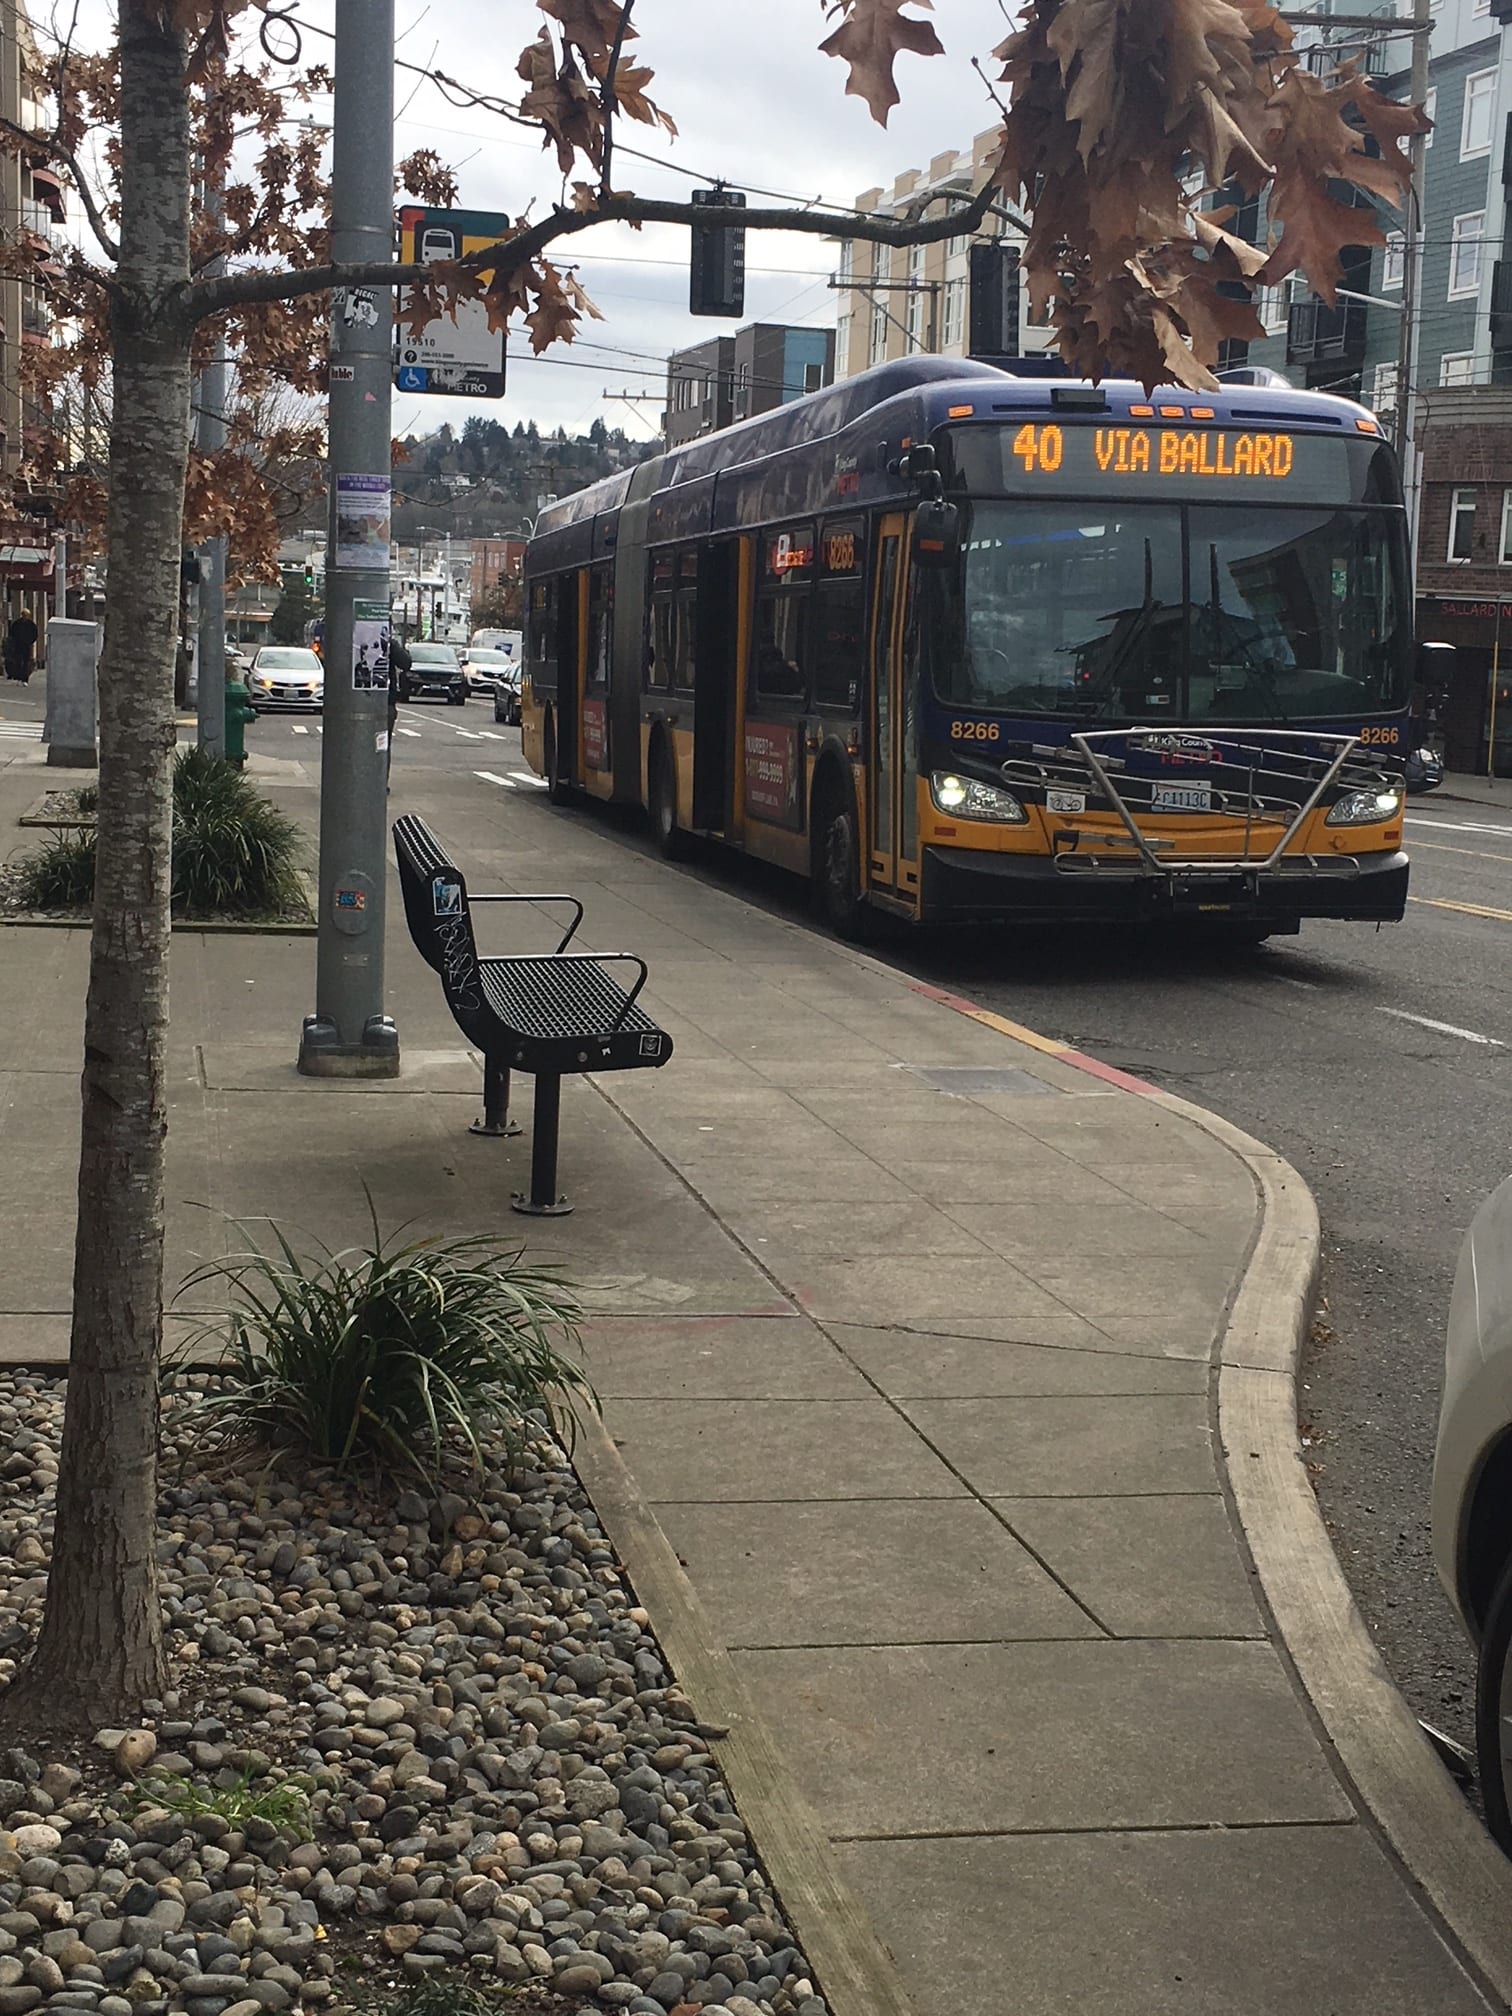 LEVY DOLLARS AT WORK | With your help, we worked with King County Metro on a proposal to make Route 40 bus trips more reliable, safe, and on-time. Now, we’d like to hear from you again!